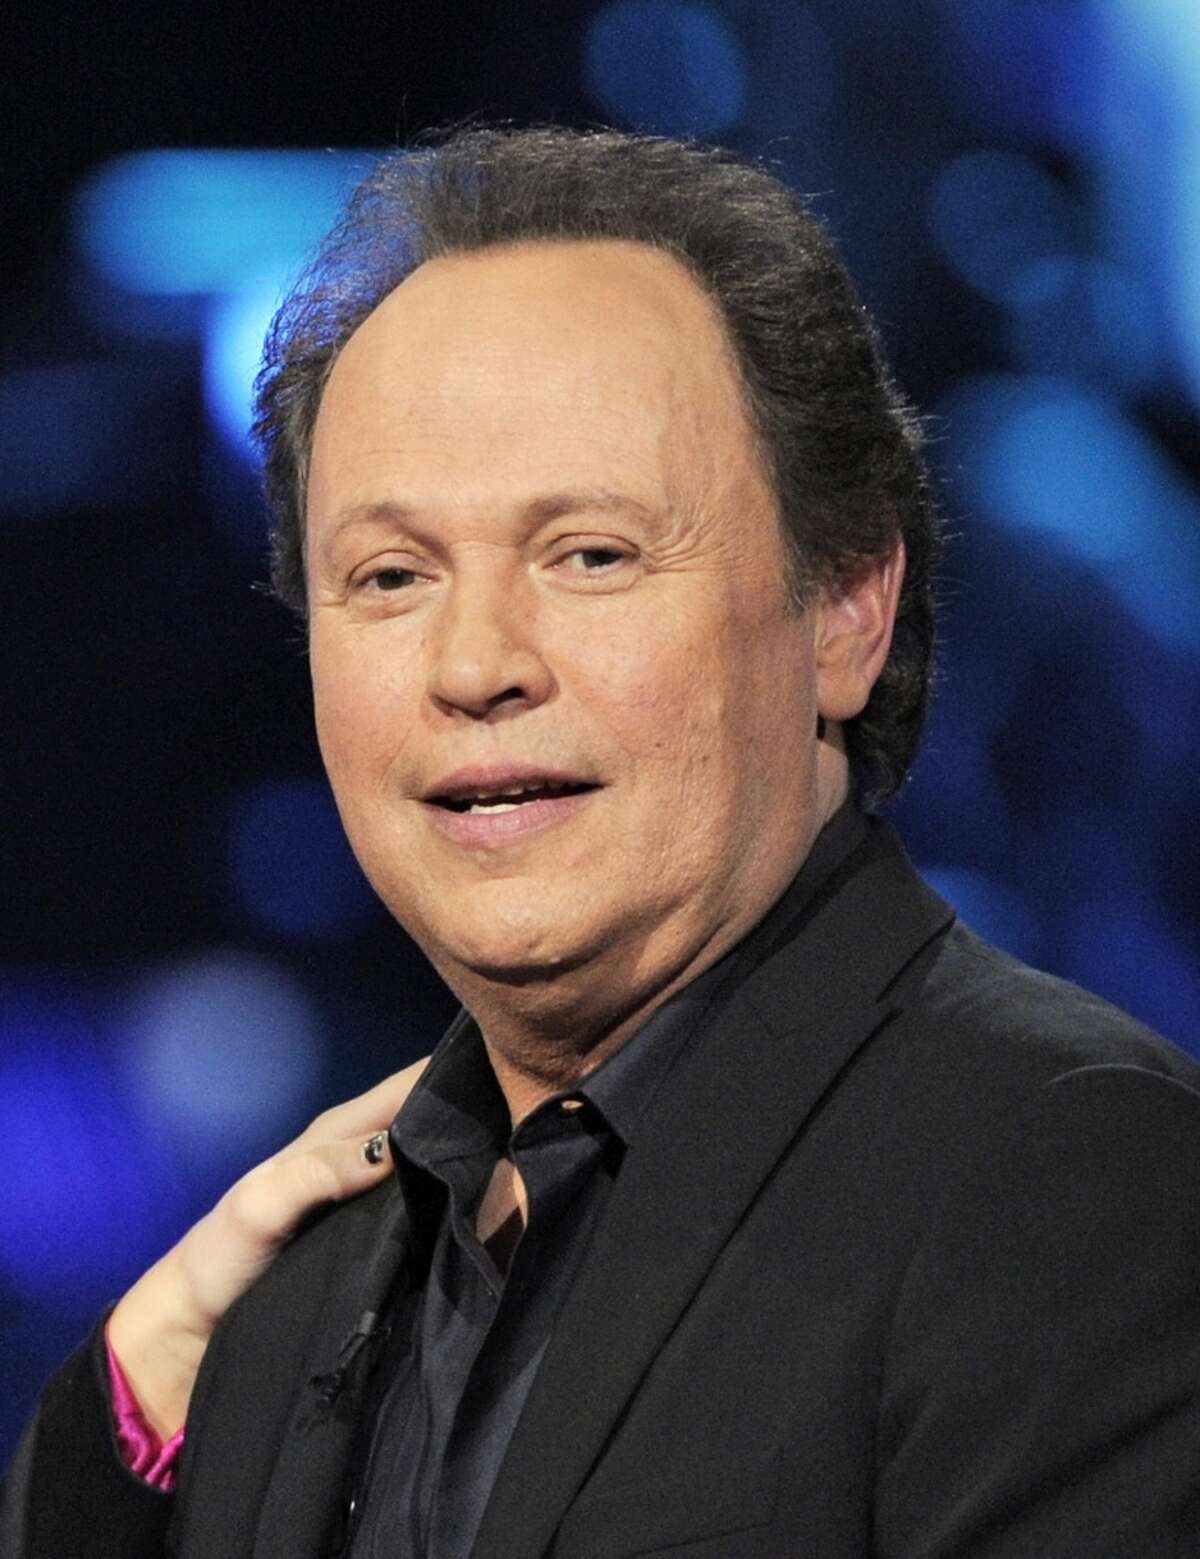 Billy Crystal writes about how awesome it is to become a grandfather.